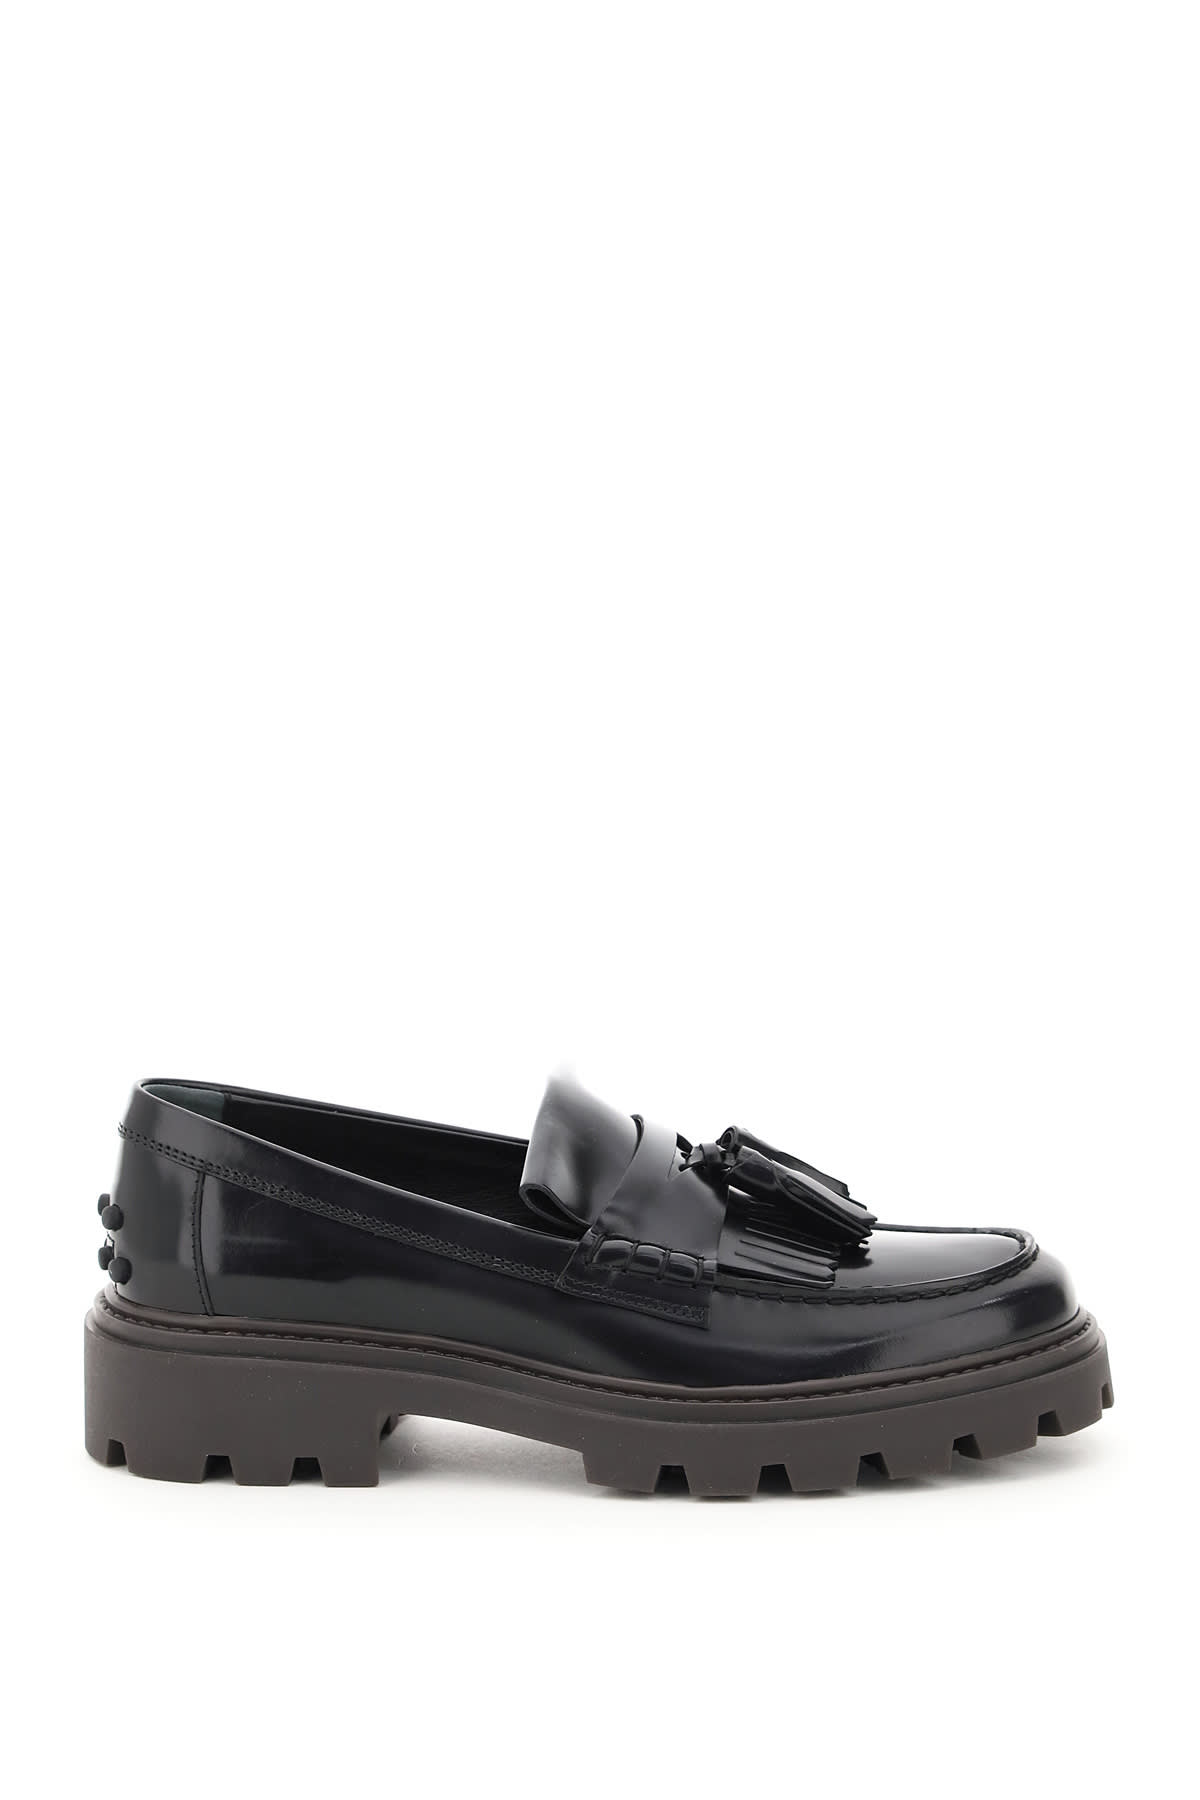 Tods Loafers With Fringe And Tassels